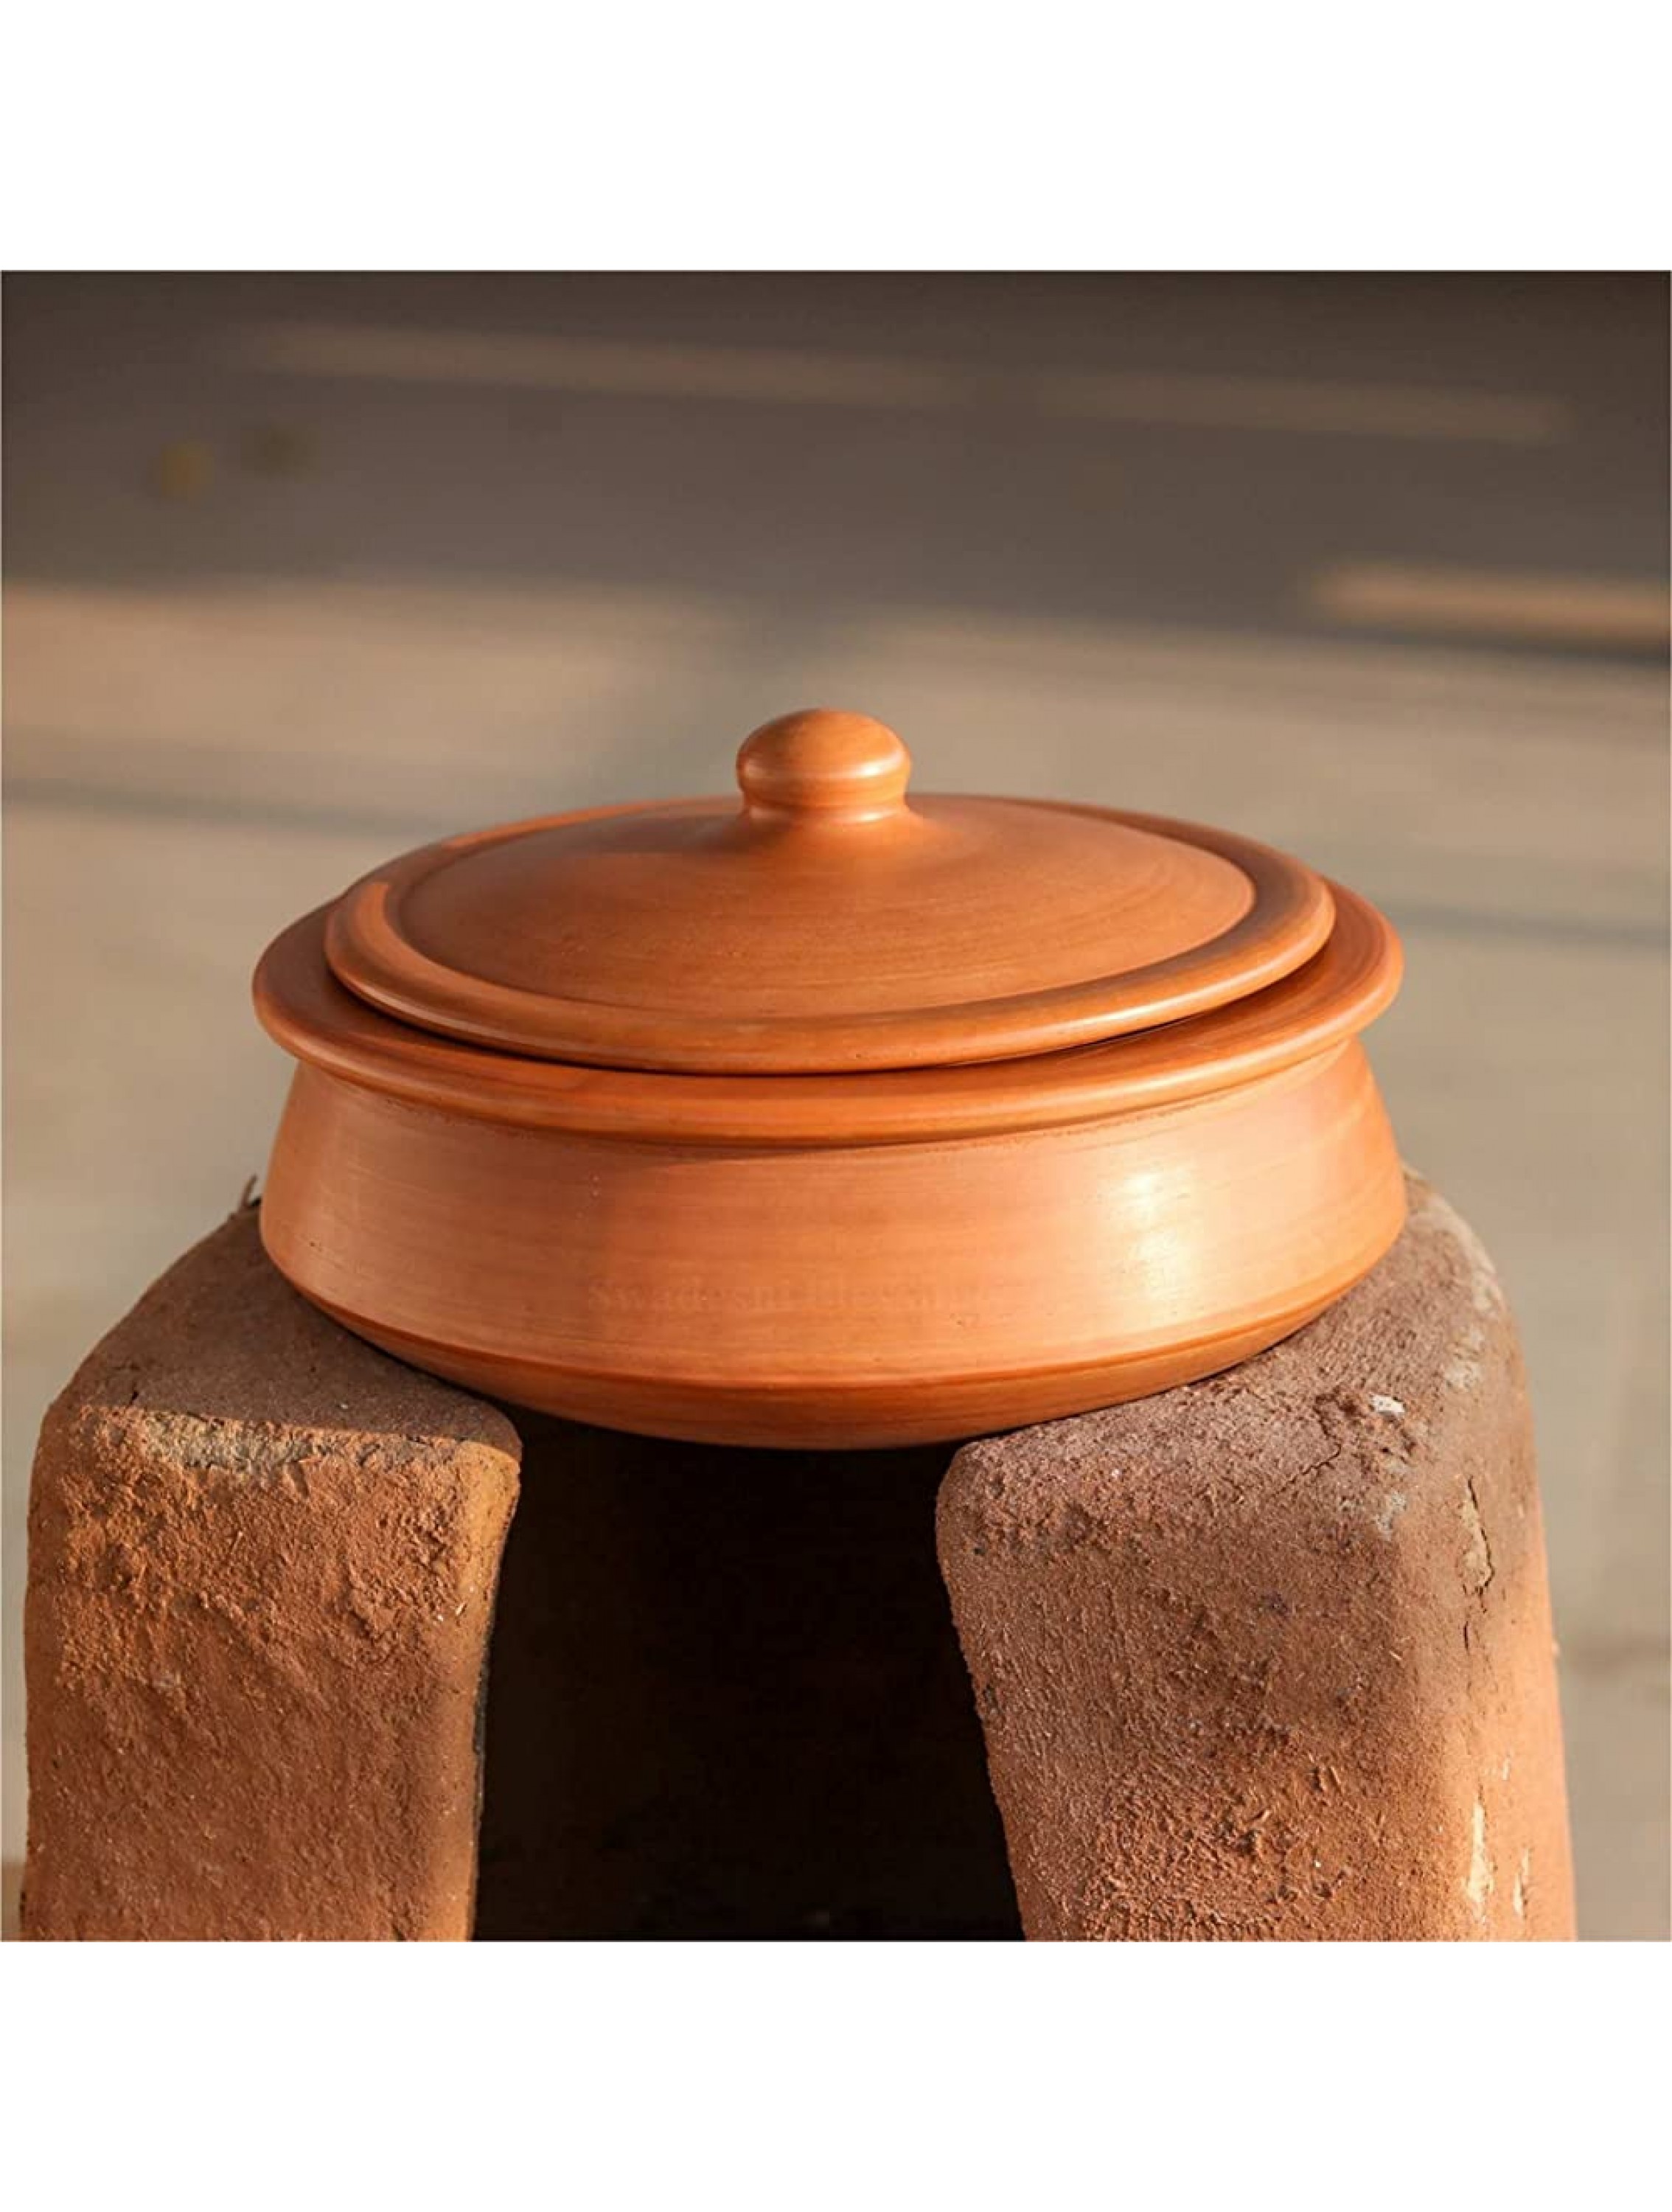 Swadeshi Blessings HandMade Exclusive Range Unglazed Clay Handi Earthen Kadai Clay Pot For Cooking & Serving with Lid 2.8Liters With Natural White Firing Shade & Mirror Shine + PALM LEAF STAND - B54A8W1BG